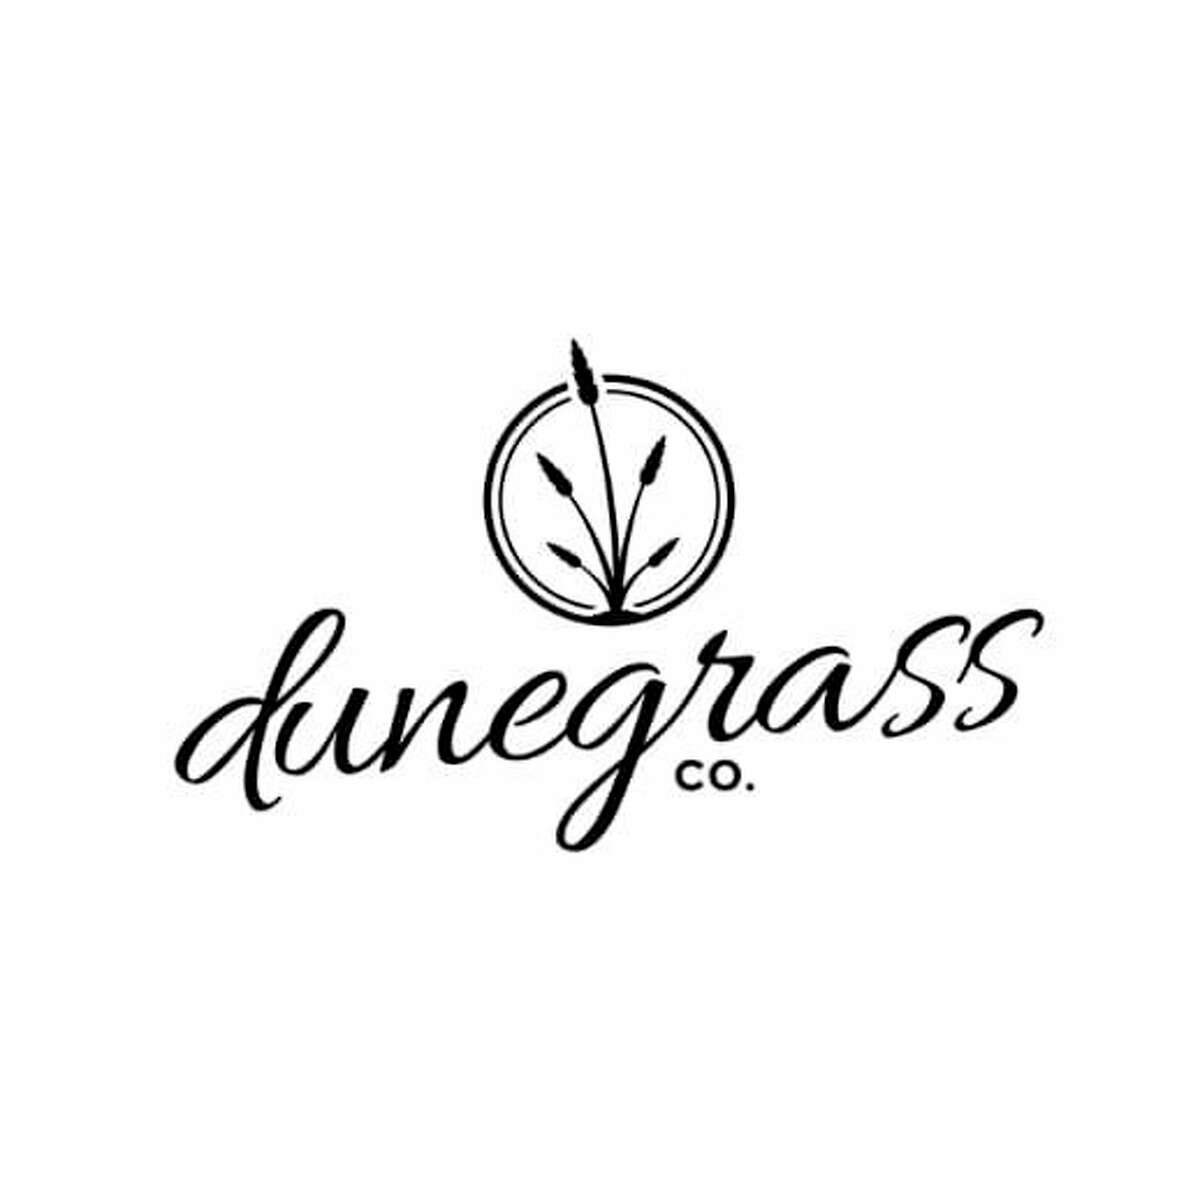 As well as opening in Manistee and Big Rapids, Dunegrass is looking to open in Cadillac, Beulah and Marquette, according to its website. For more information on the company and what it offers, visit dunegrass.co or follow @dunegrass.co on Facebook. (Courtesy photo)